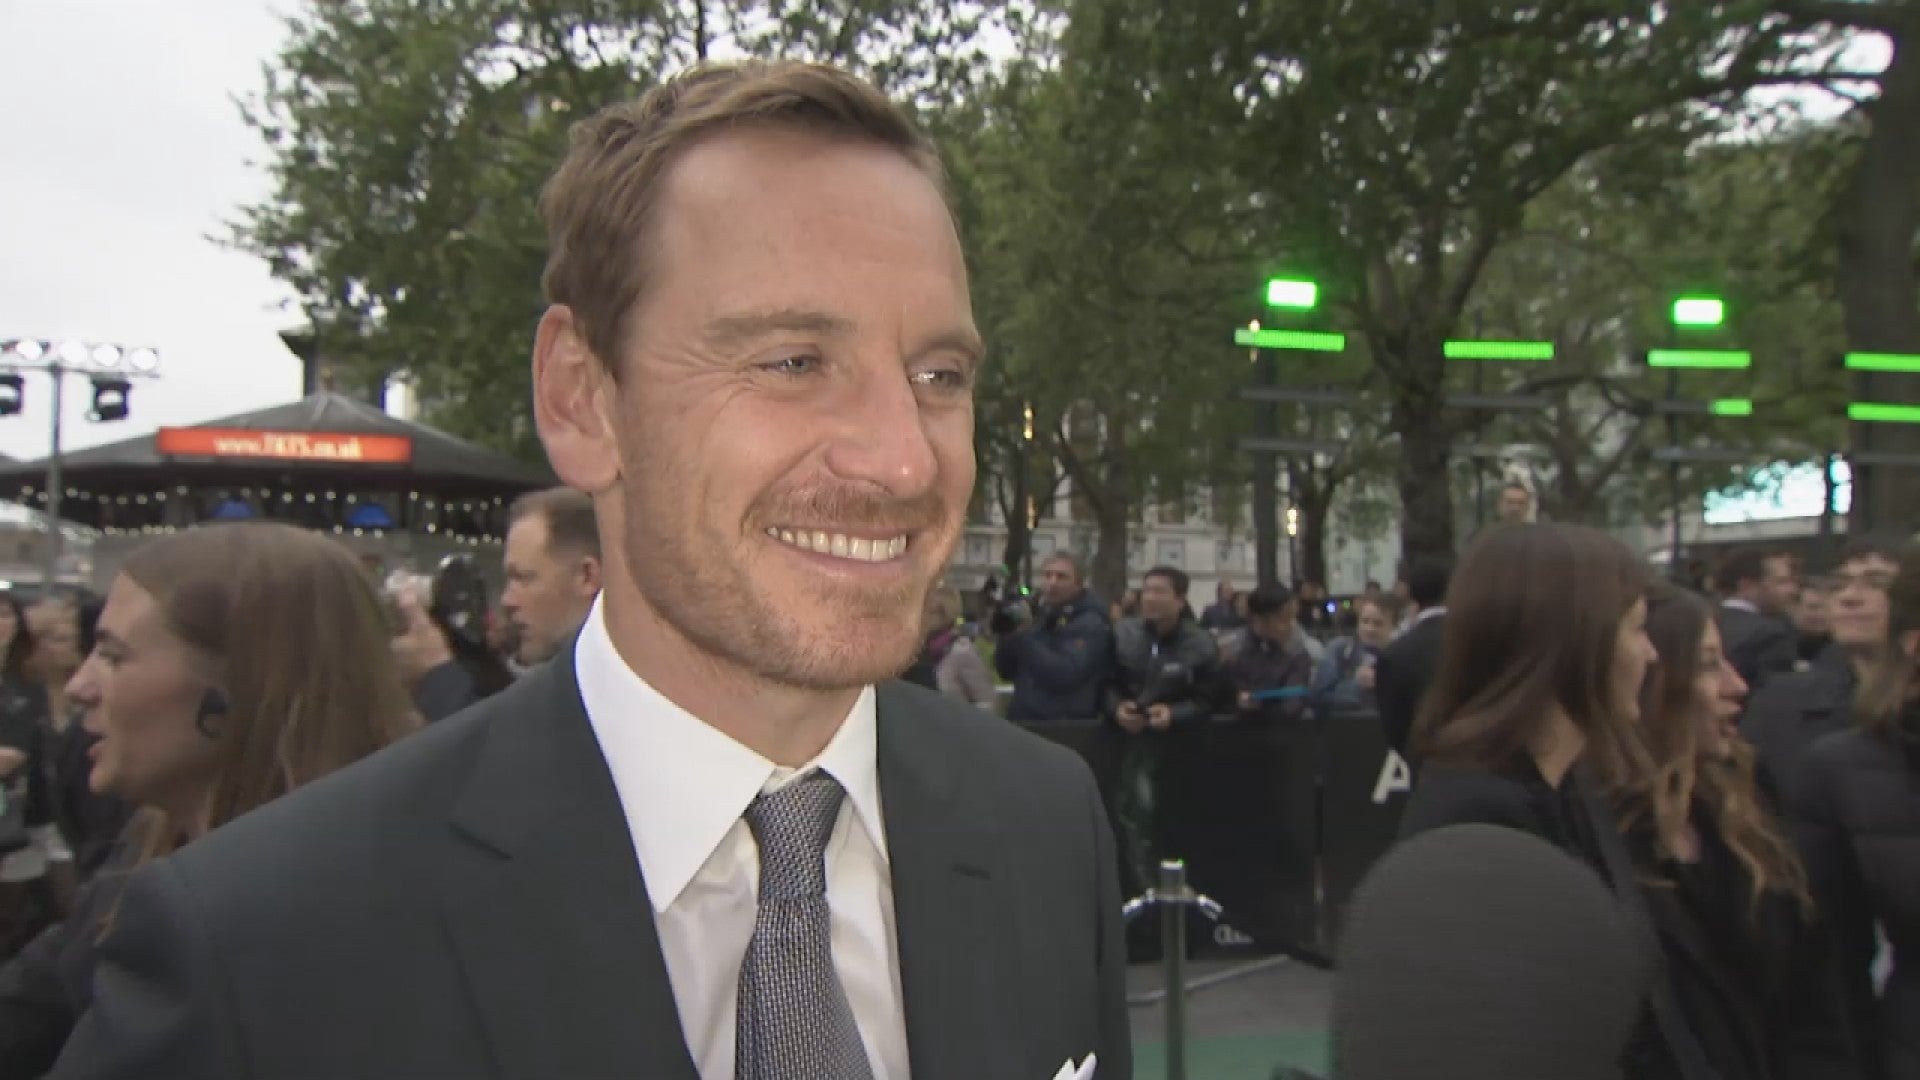 Michael Fassbender, Alicia Vikander Welcomed Child: First Baby Photos –  SheKnows